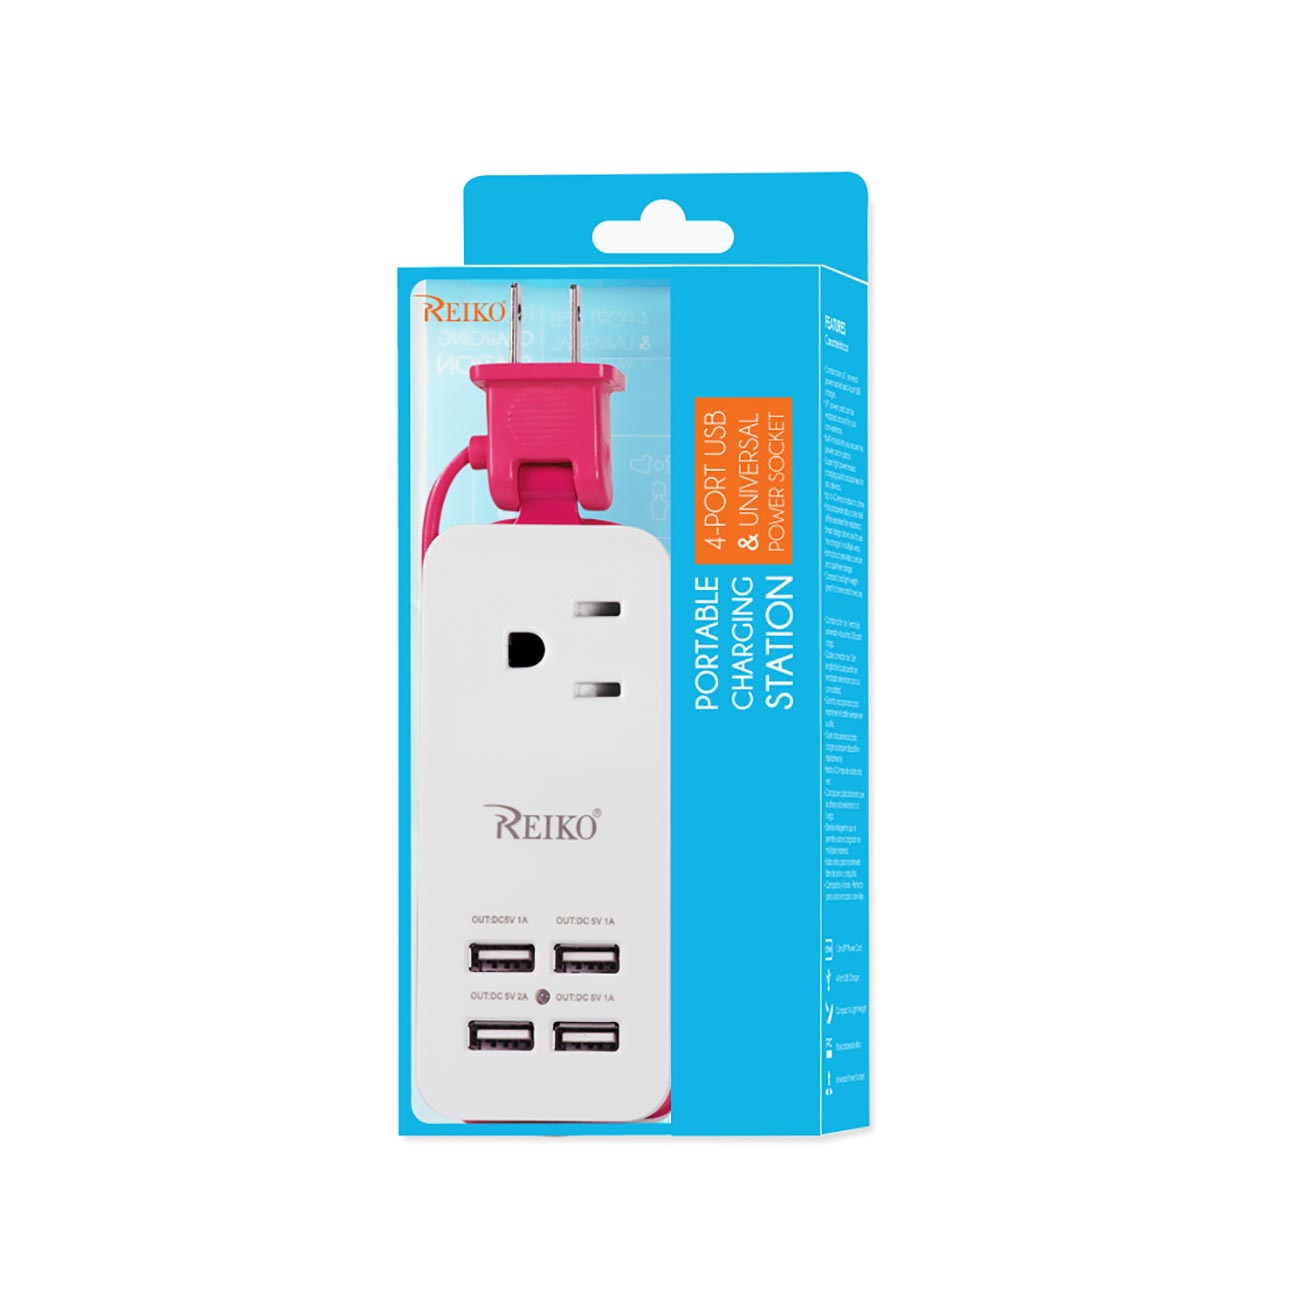 Wall Charging Station Home 4 USB 4.1Amp Hot Pink Color